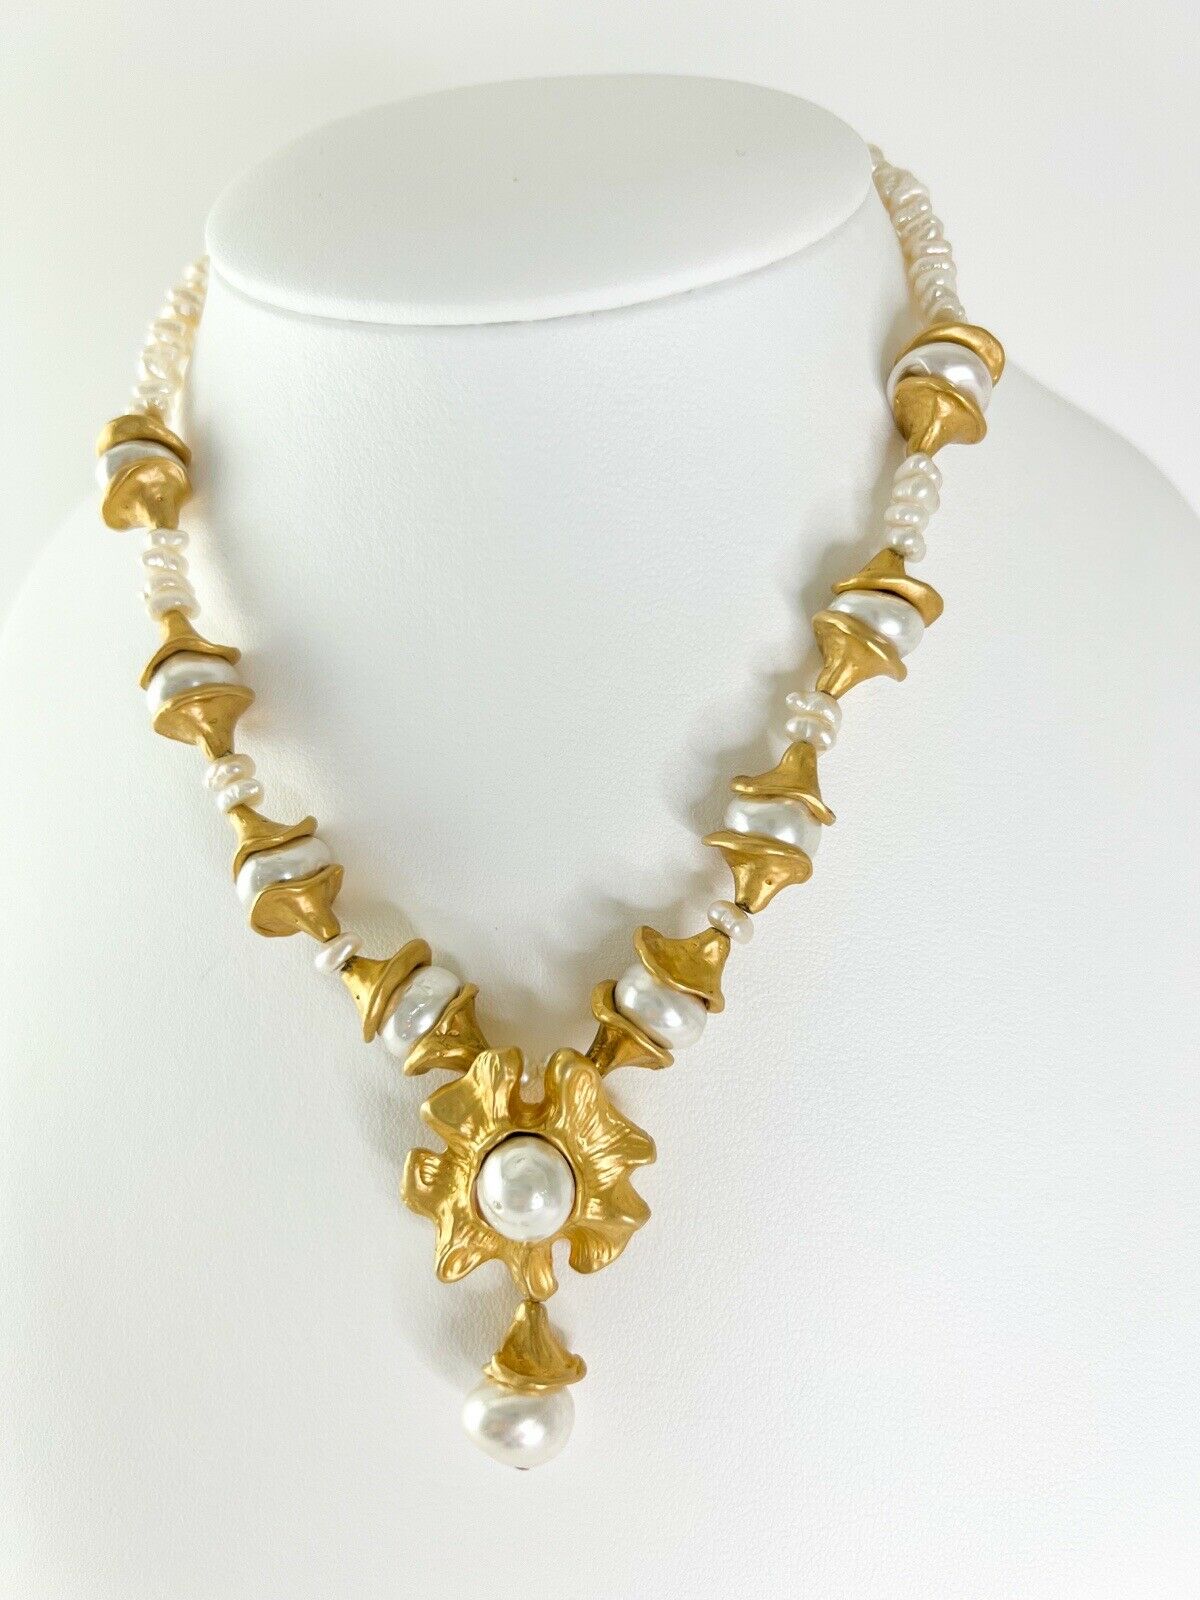 Vintage Choker Necklace Pearl  Beads Women Jewelry Gold